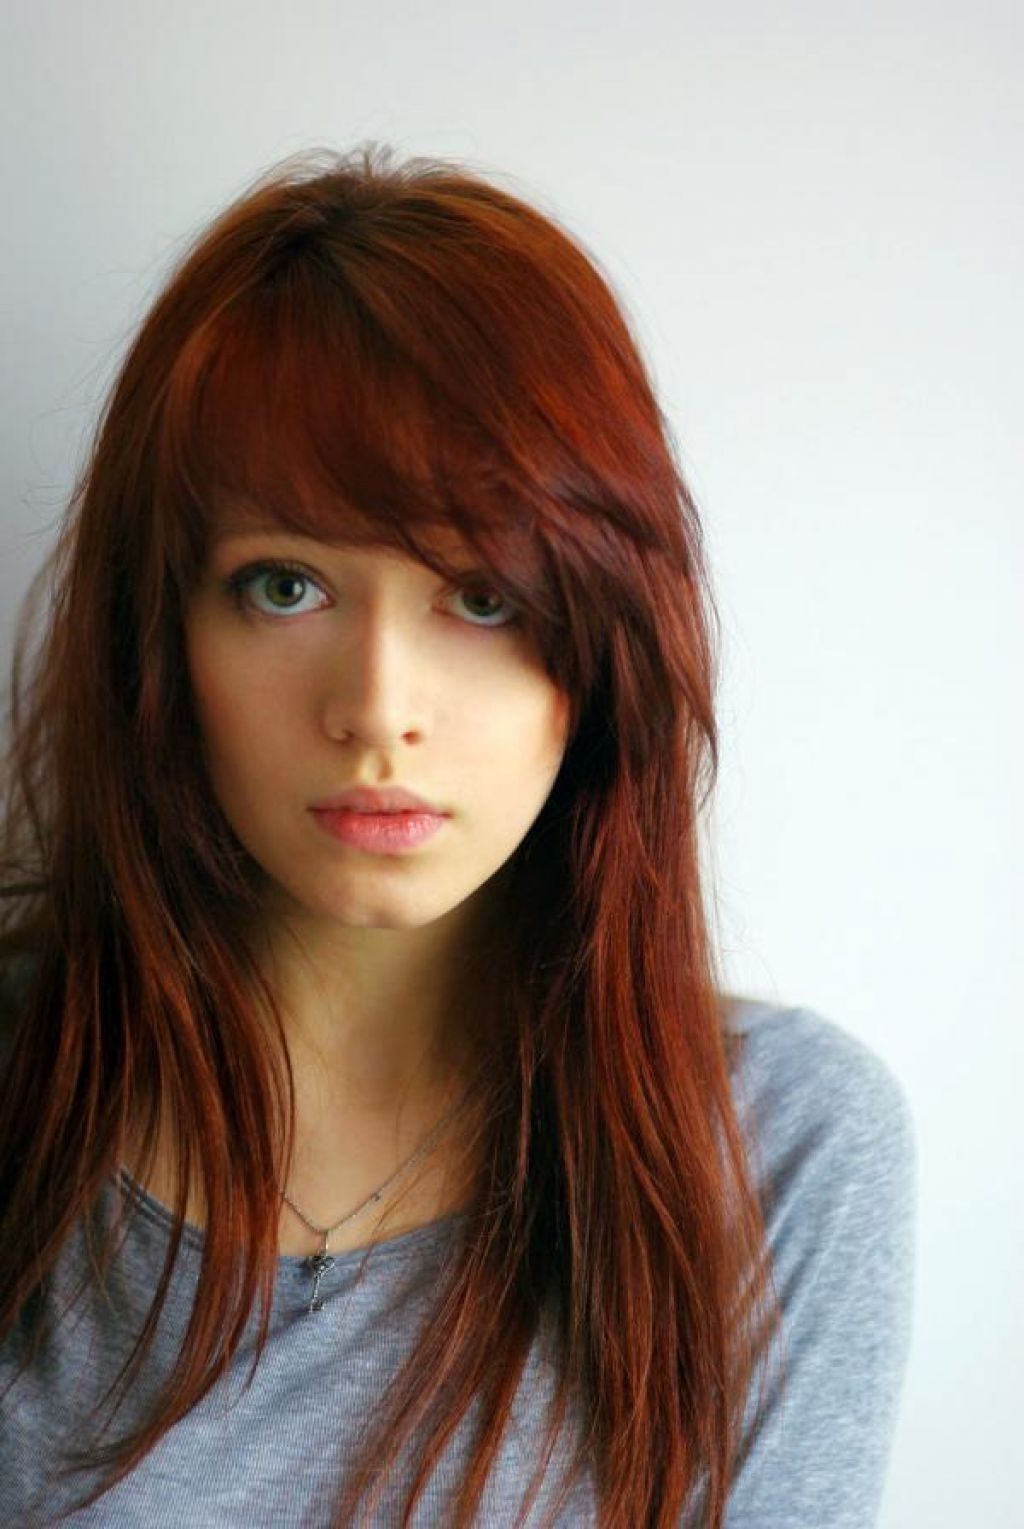 Well Known Ginger Highlights Ponytail Hairstyles With Side Bangs Pertaining To Long Hairstyles With Side Bangs Red Hair (View 9 of 20)